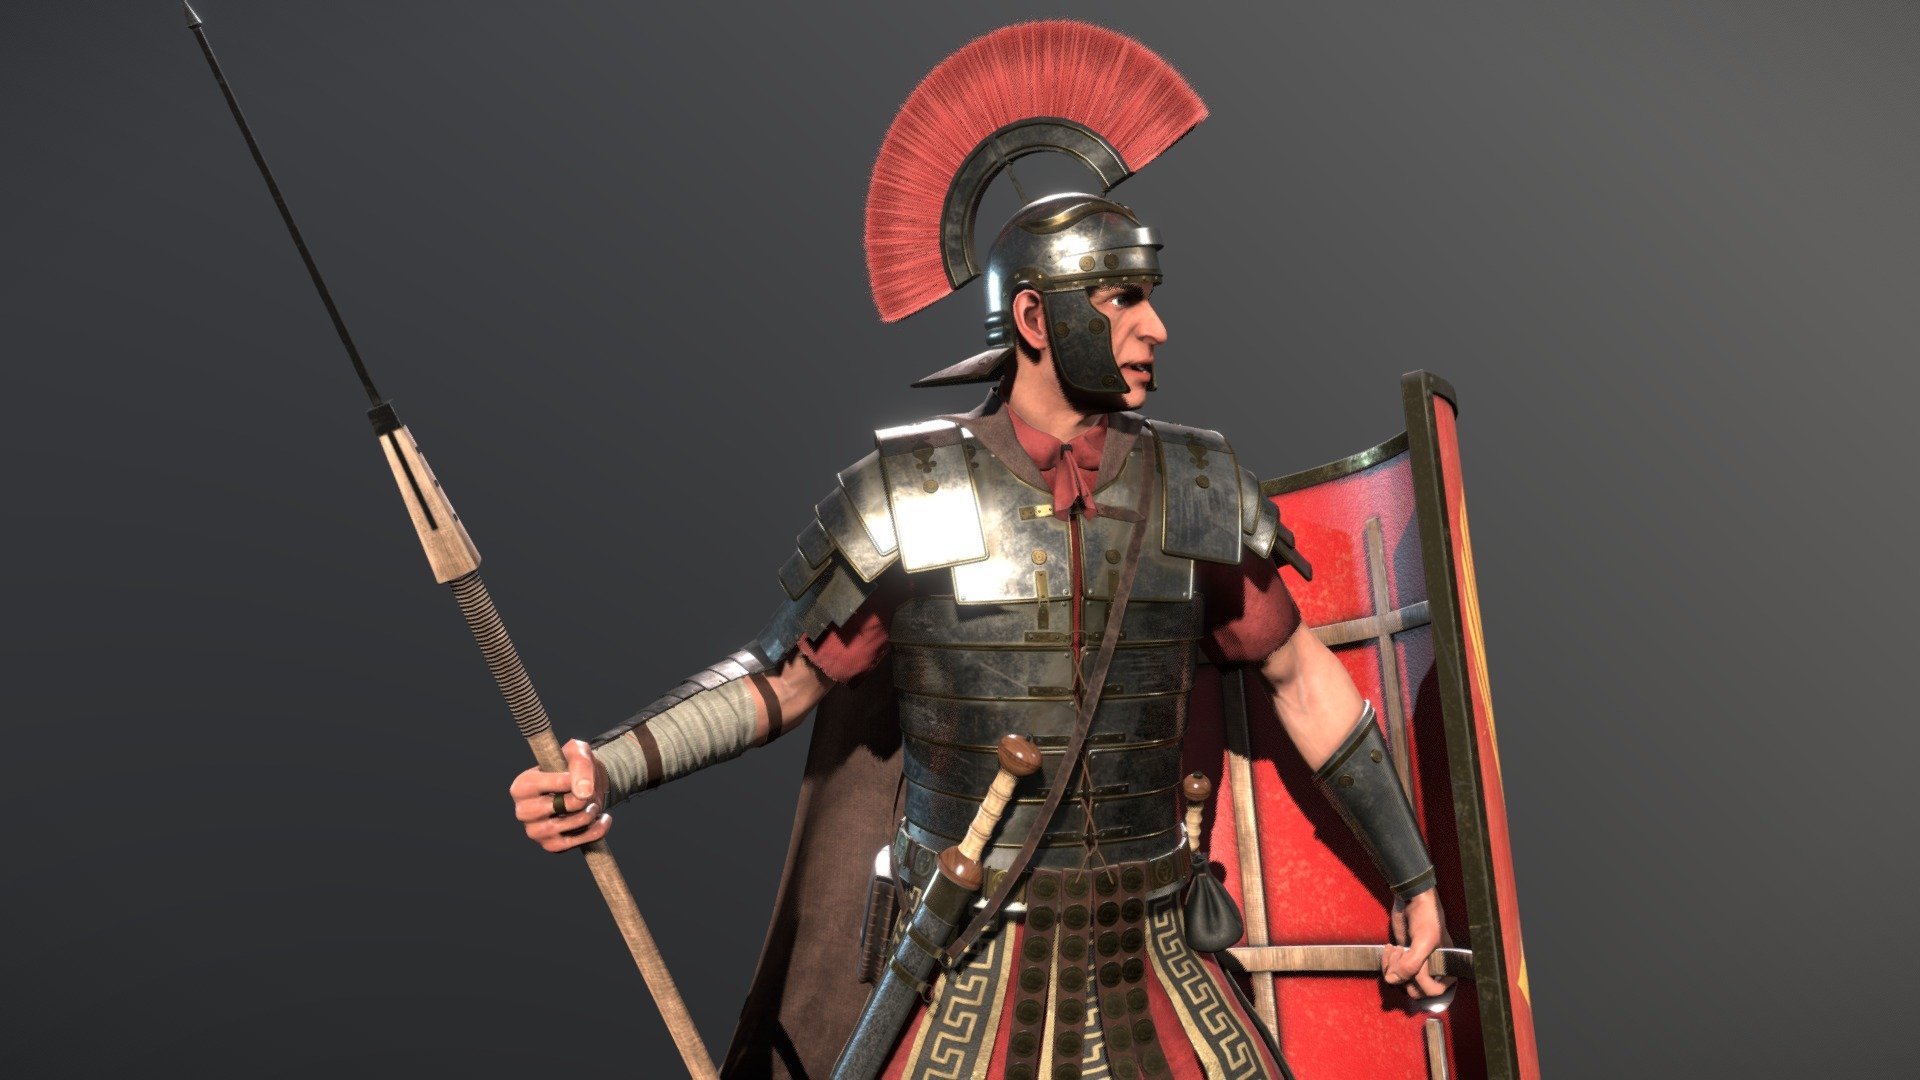 Roman Optio, second in command to a Centurion. 

A personal piece I created to try and push my character creation skills. Created with Blender and Substance Painter.

Check out my Artstation for more renders, comments and critiques are welcome. Cheers!
https://www.artstation.com/artwork/3oEXnB - Optio - 3D model by Rob Allen (@roba) 3d model